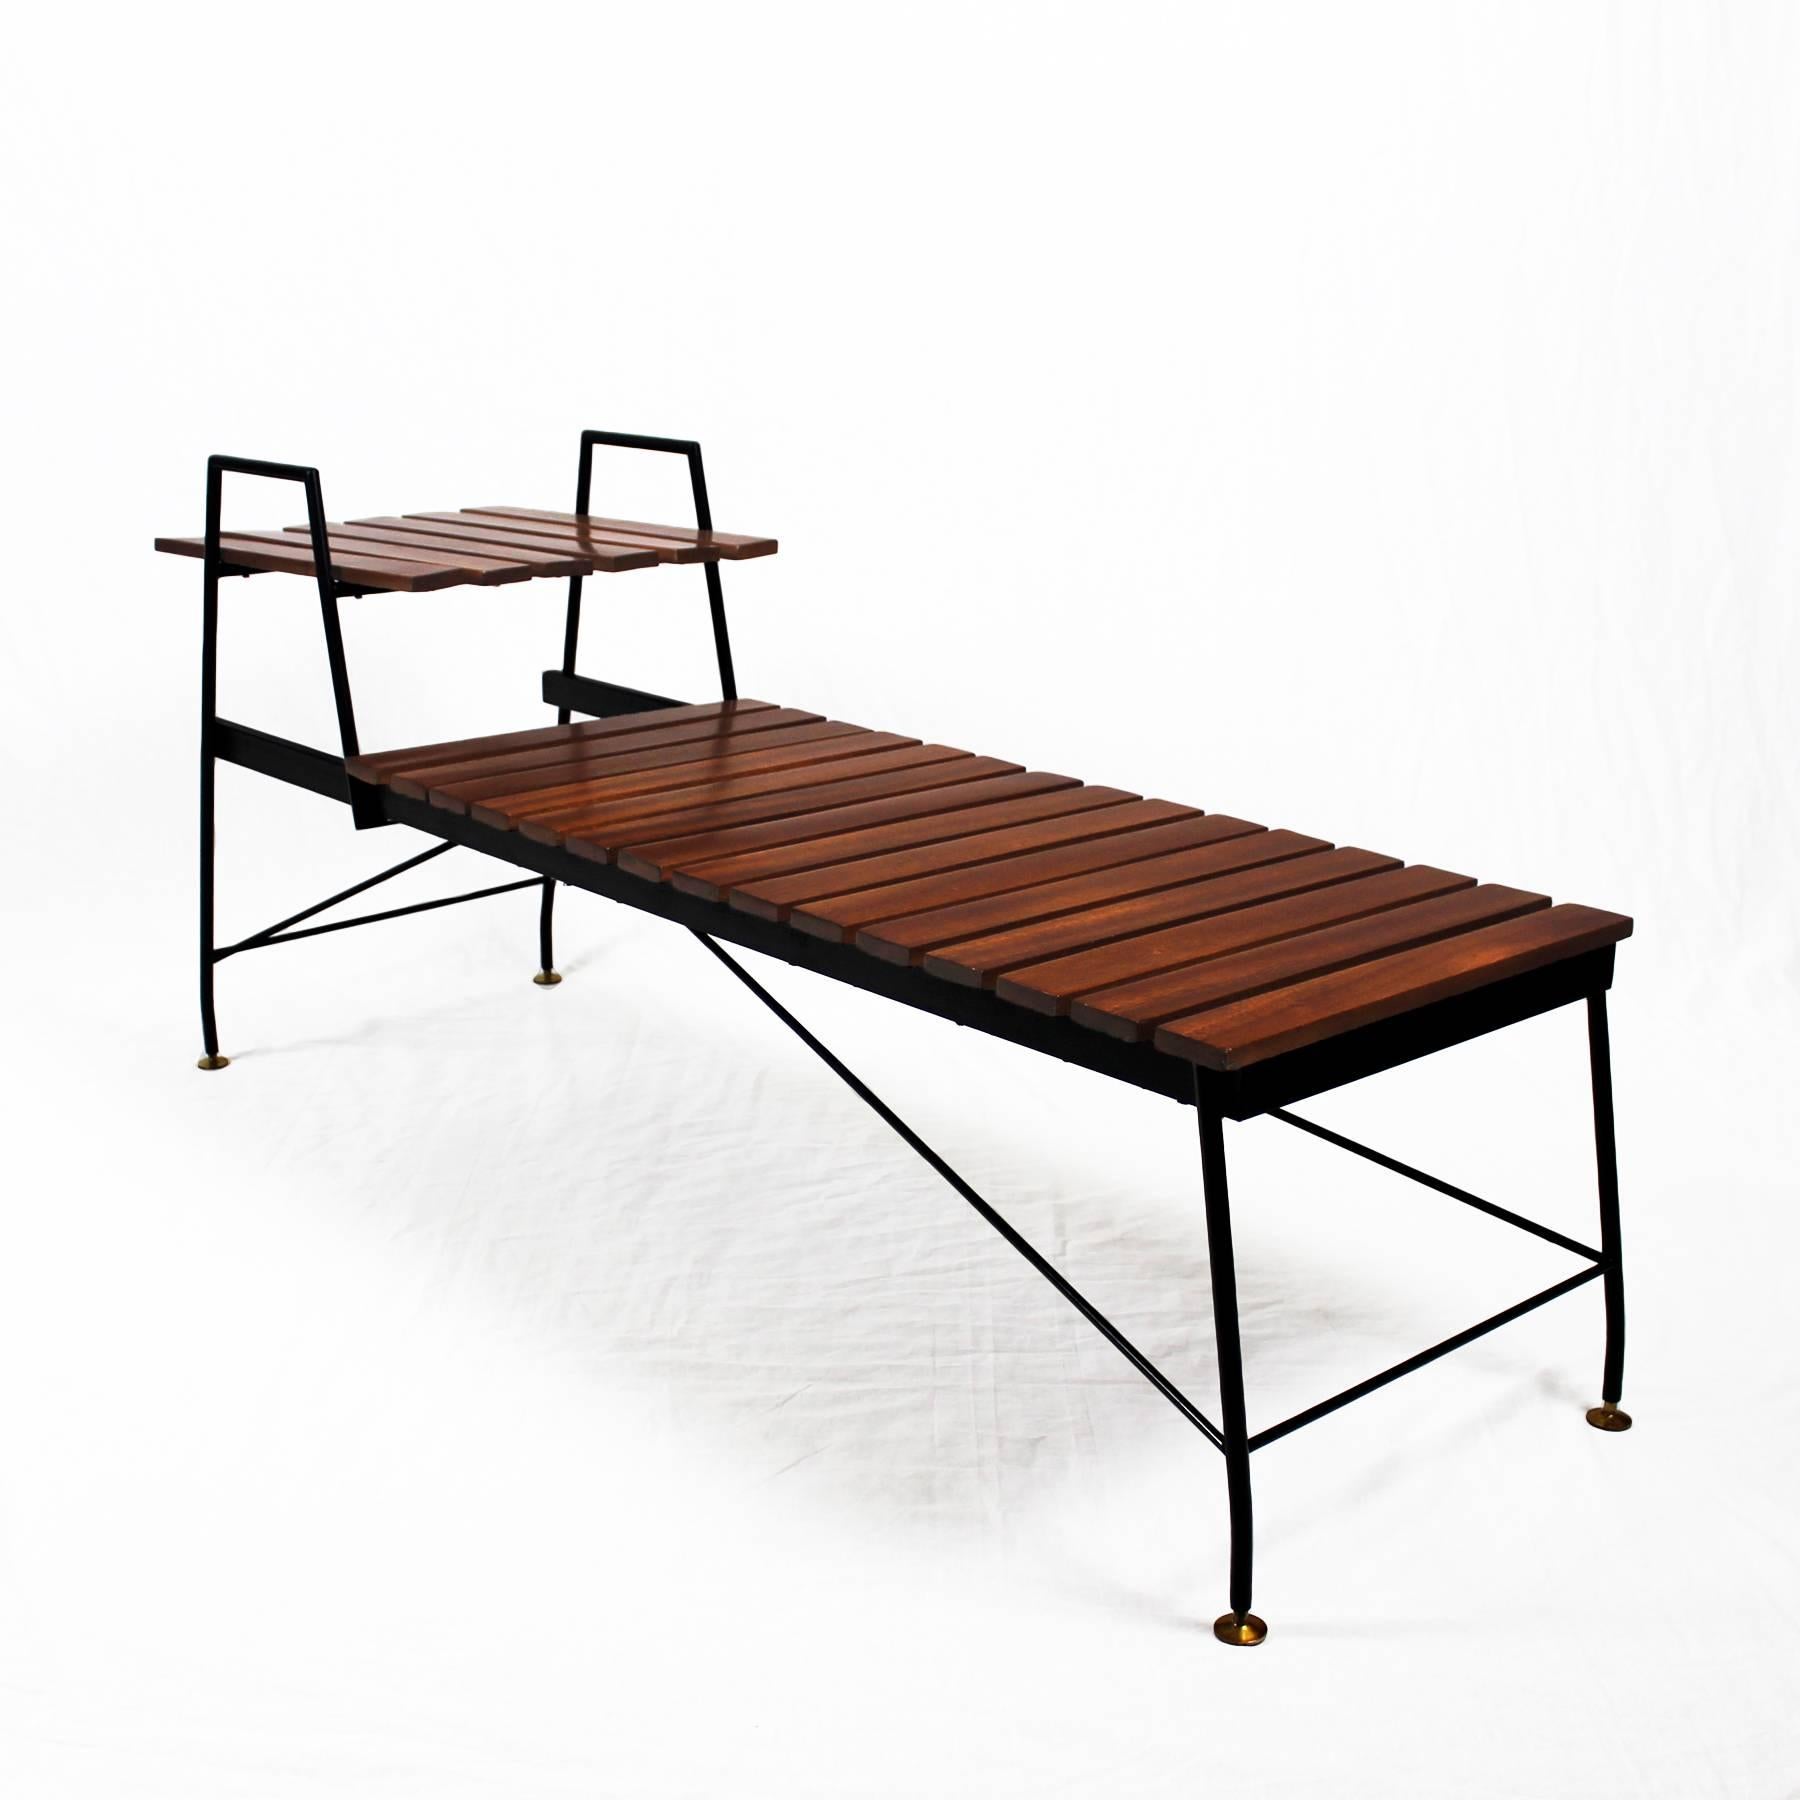 Bench-table, black lacquered steel structure and feet with brass finitions, satiny varnished solid teak slats.

Italy, circa 1950.

